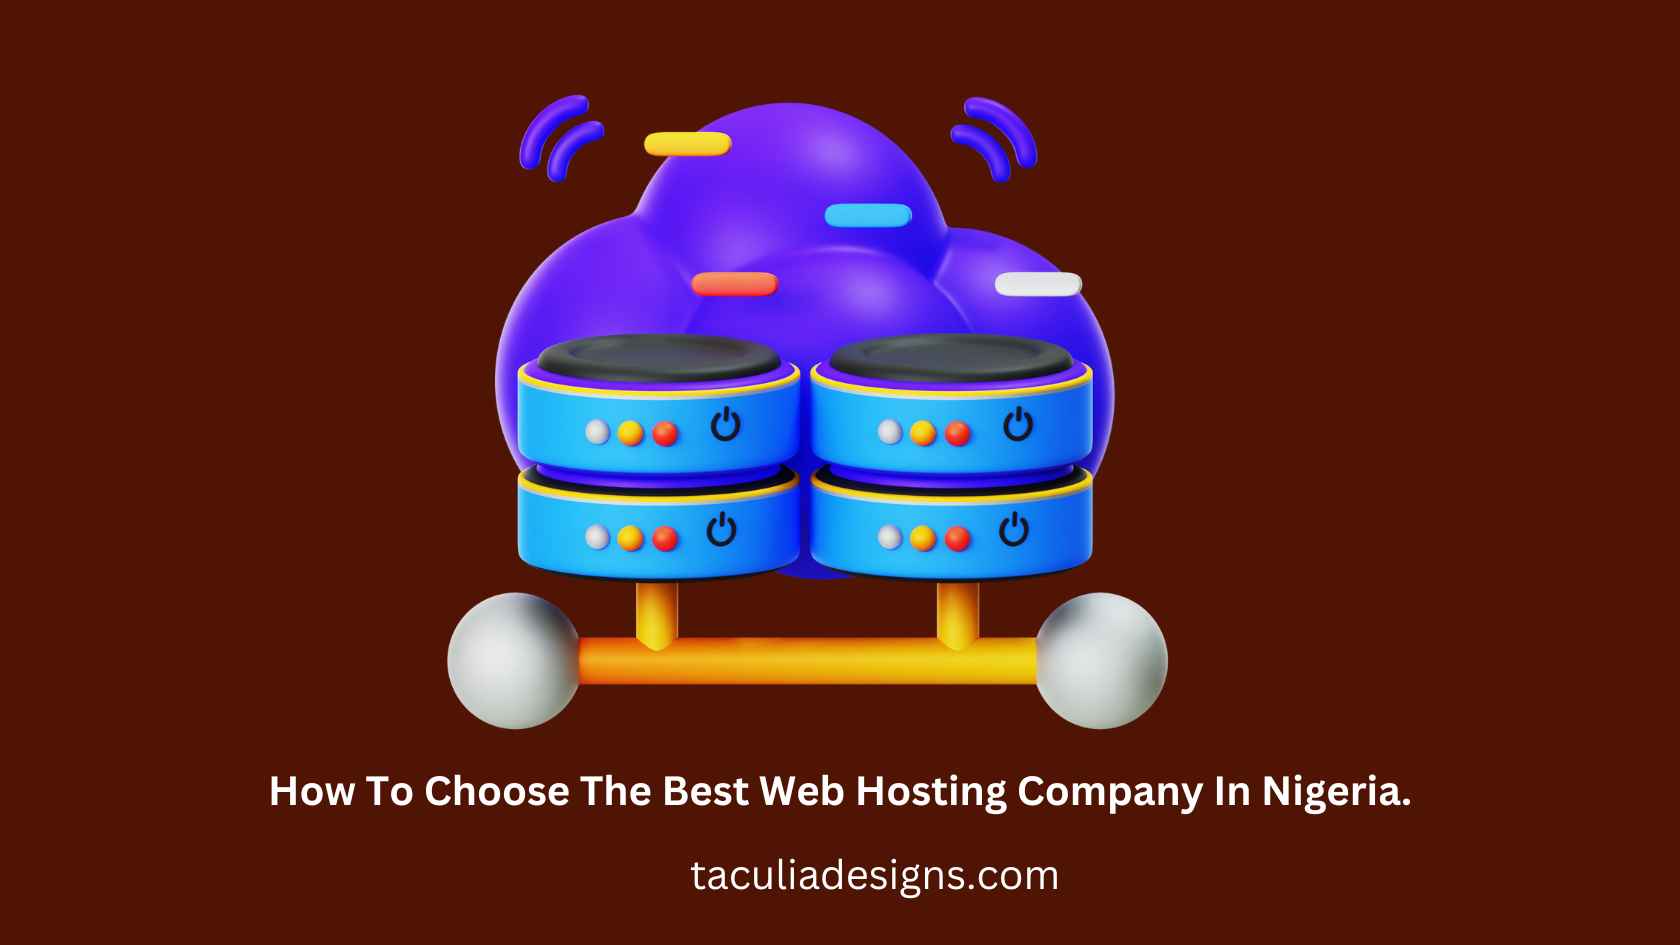 How To Choose The Best Web Hosting Company In Nigeria.